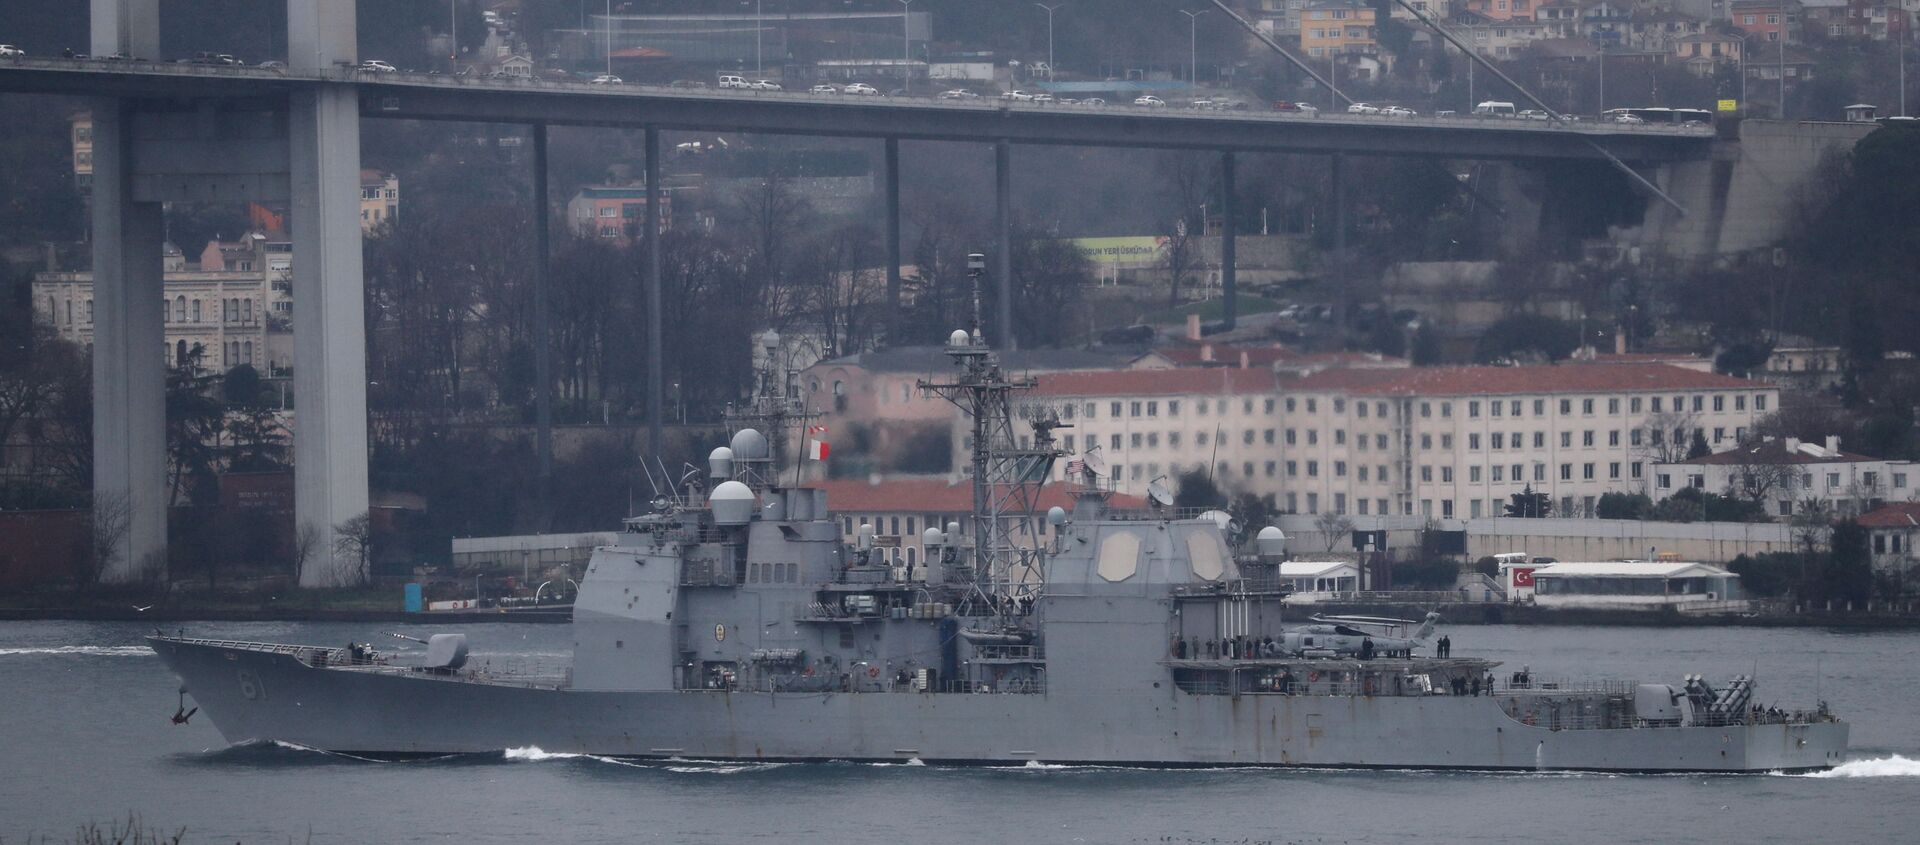 U.S. Navy guided-missile cruiser USS Monterey (CG-61) sails in the Bosphorus, on its way to the Black Sea, in Istanbul, Turkey March 19, 2021 - Sputnik International, 1920, 14.04.2021